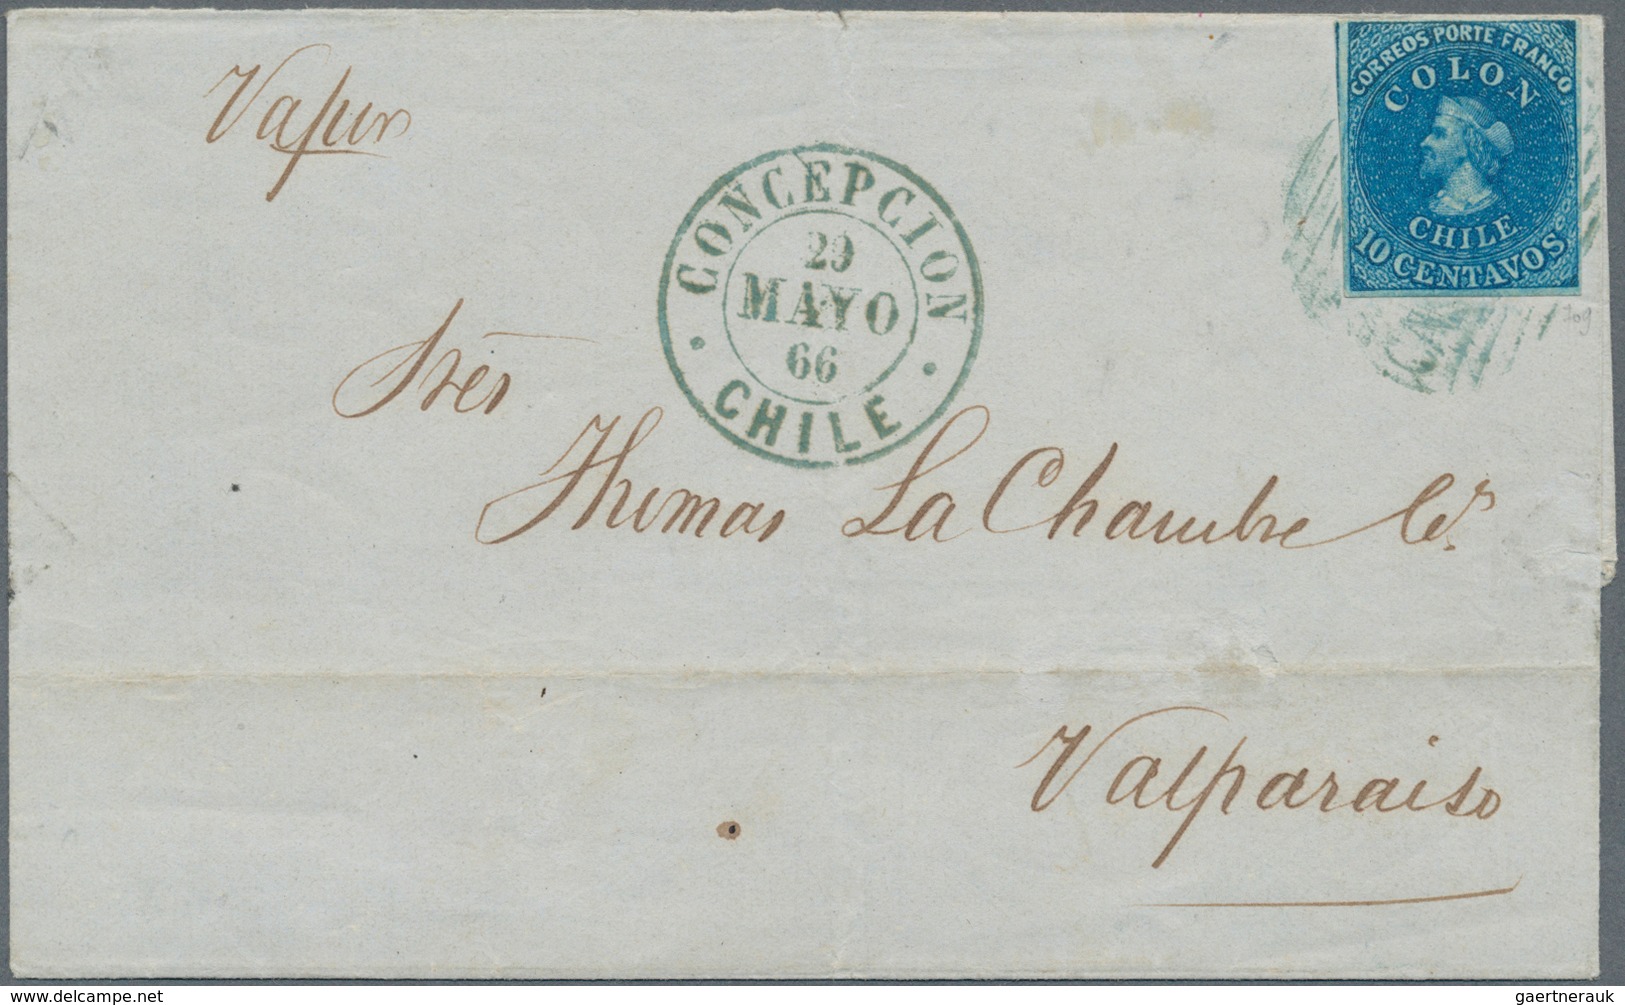 00593 Chile: 1853/1867, COLON HEADS, the outstanding collection of first issues incl. 1853 5c. used on ent